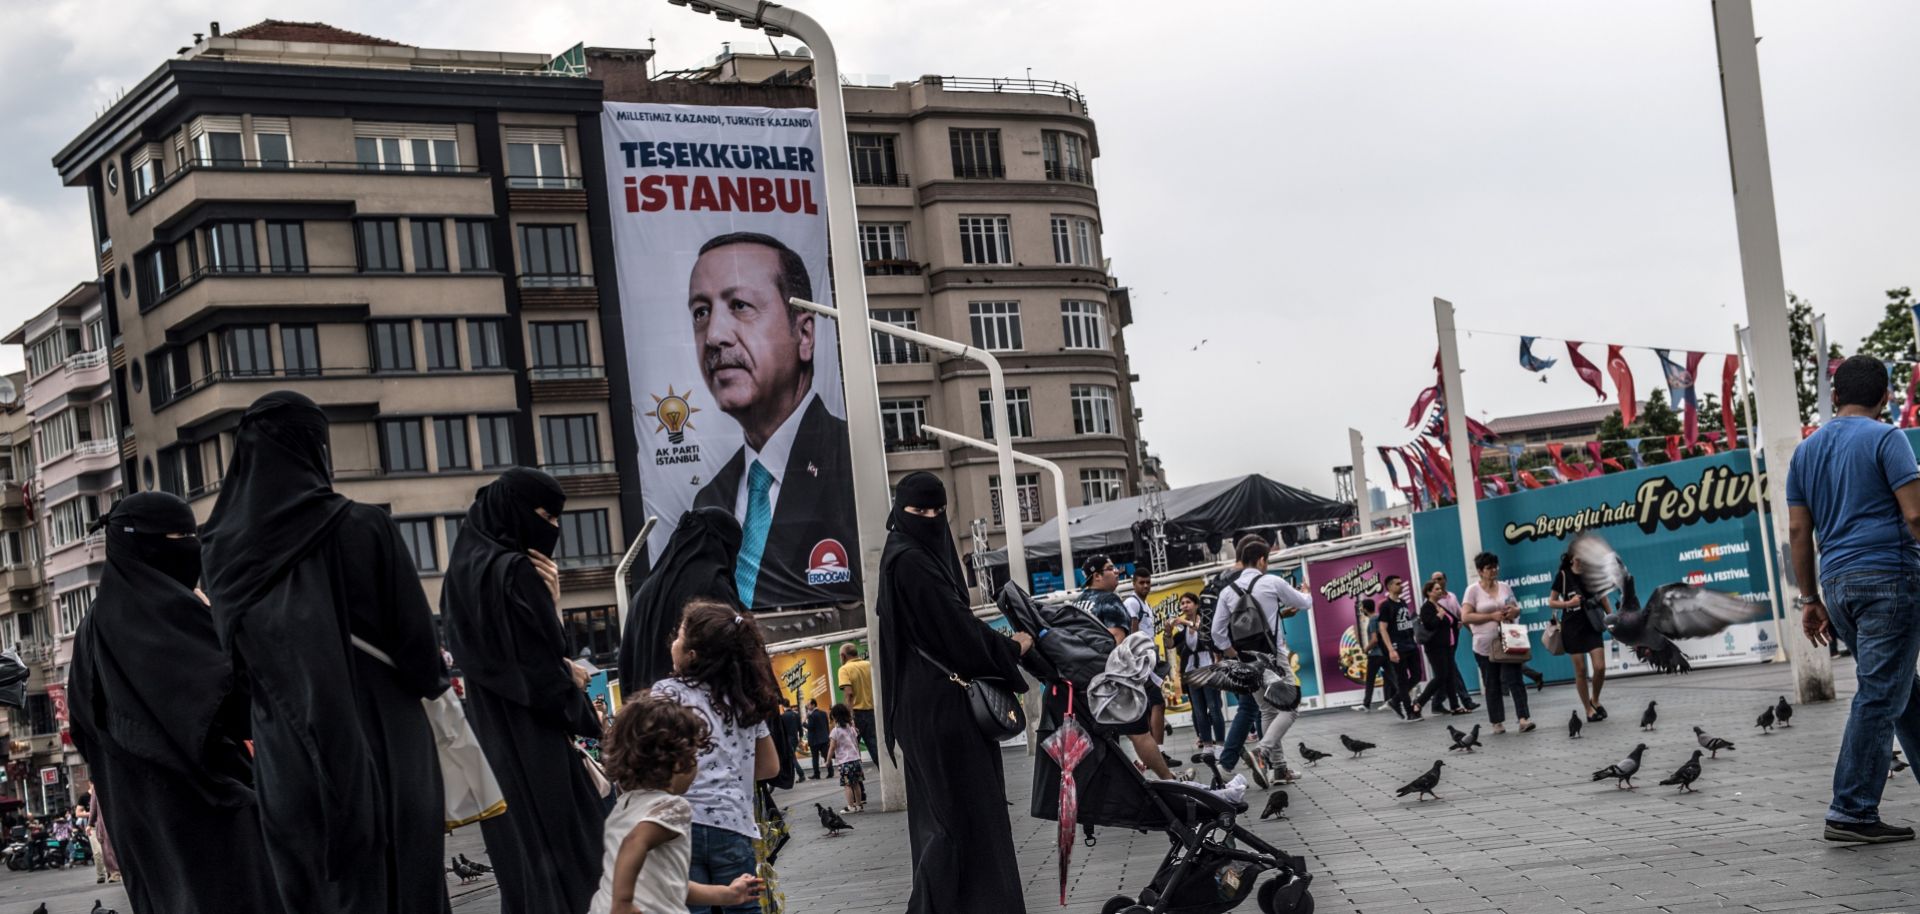 Pedestrians cross Taksim Square in Istanbul, June 28. The poster behind them shows Turkish President Recep Tayyip Erdogan with a message that read: "Thank you Istanbul."